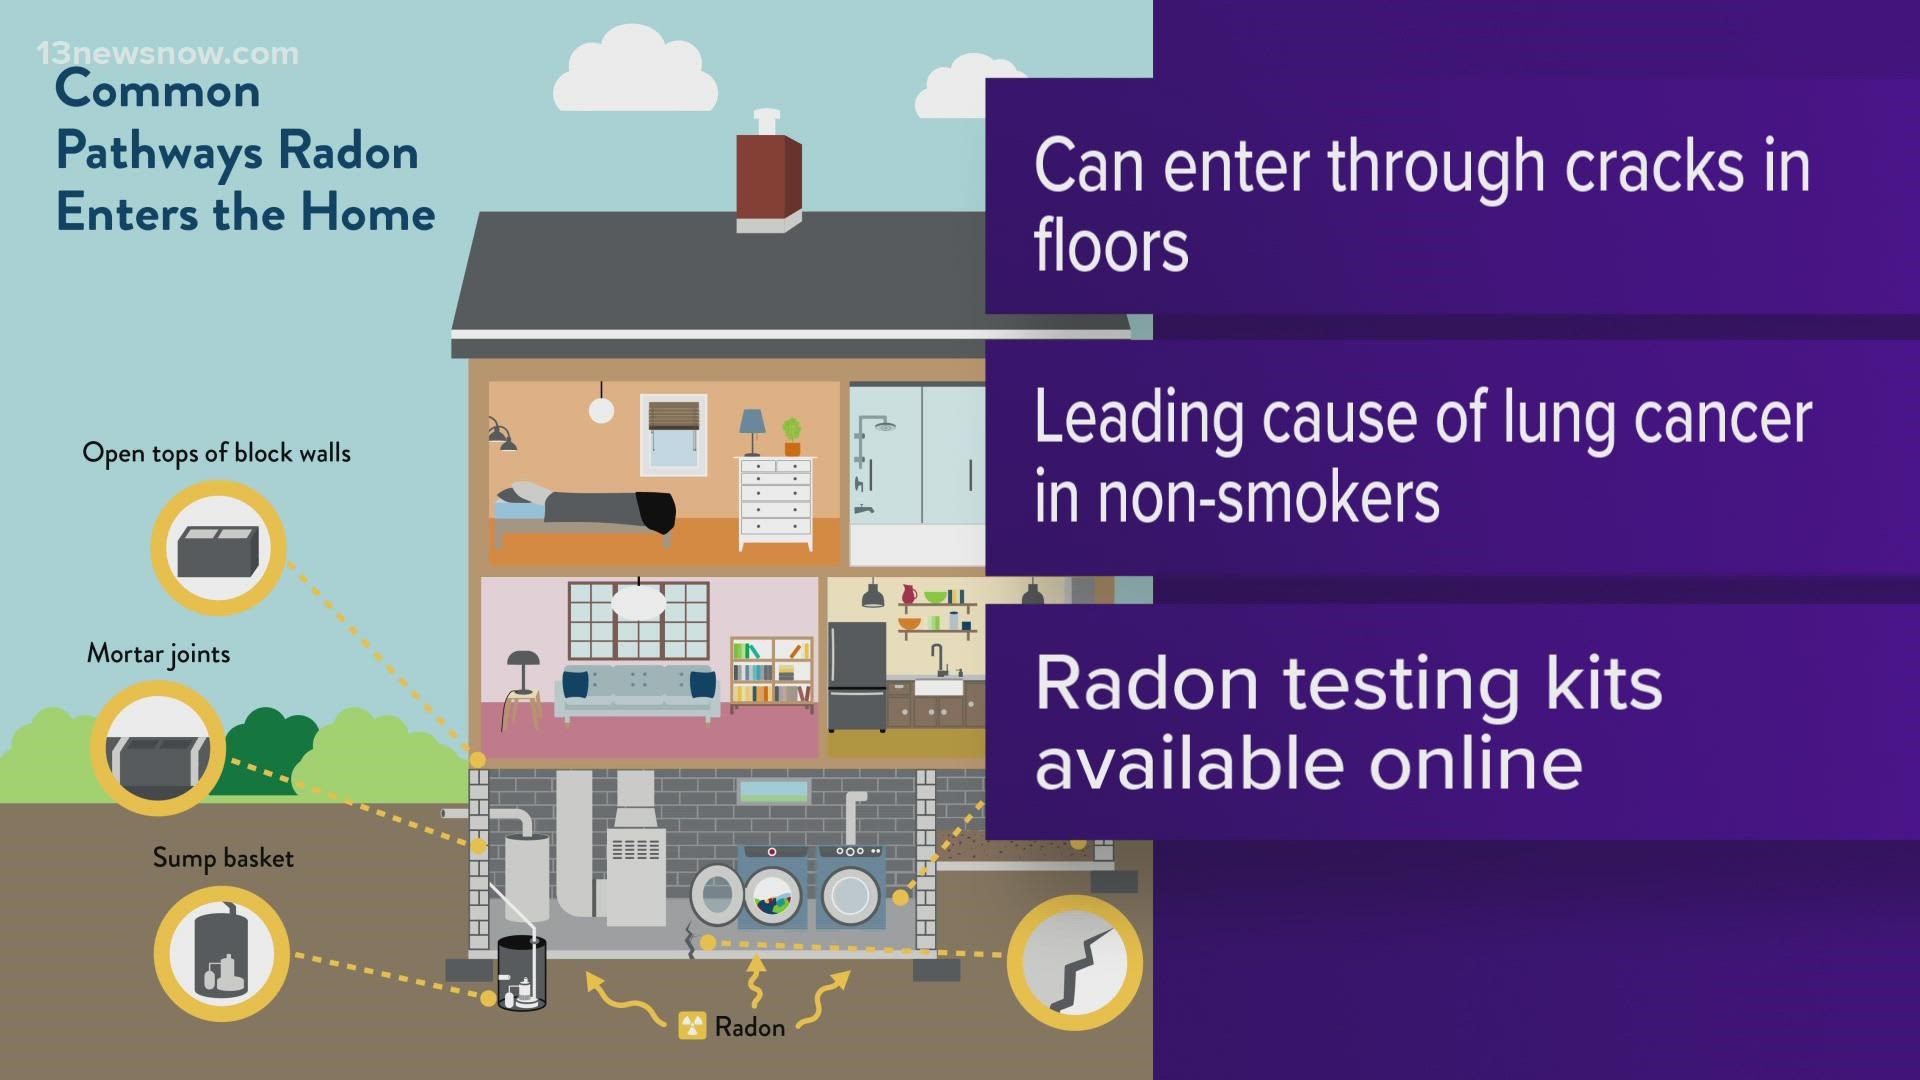 Study: 25% of homes have high radon levels